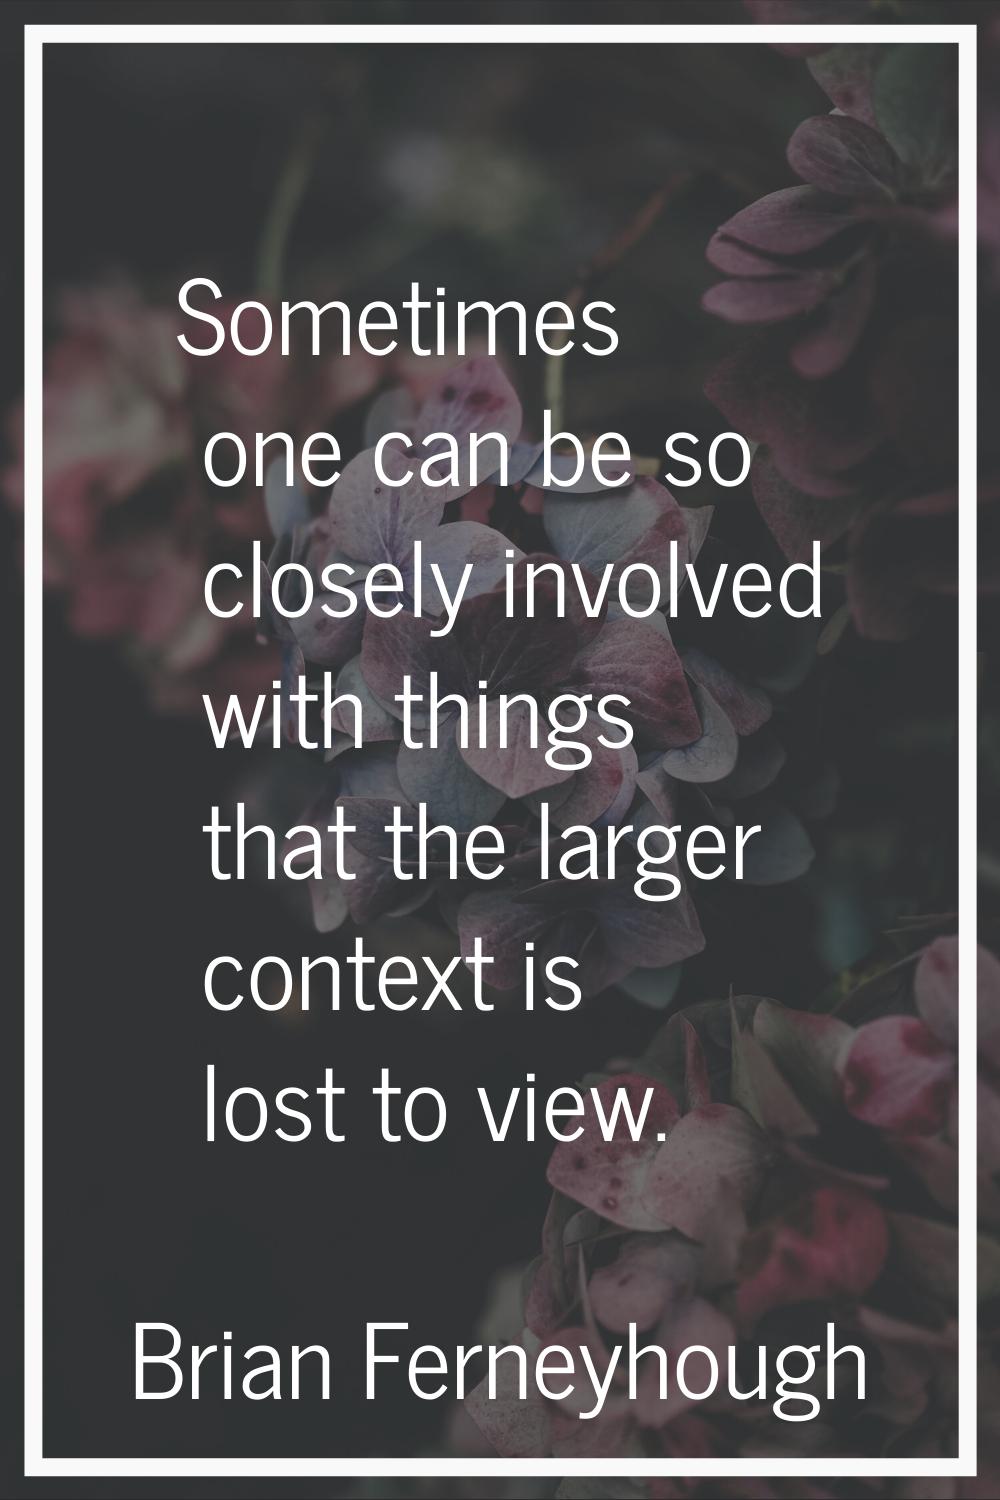 Sometimes one can be so closely involved with things that the larger context is lost to view.